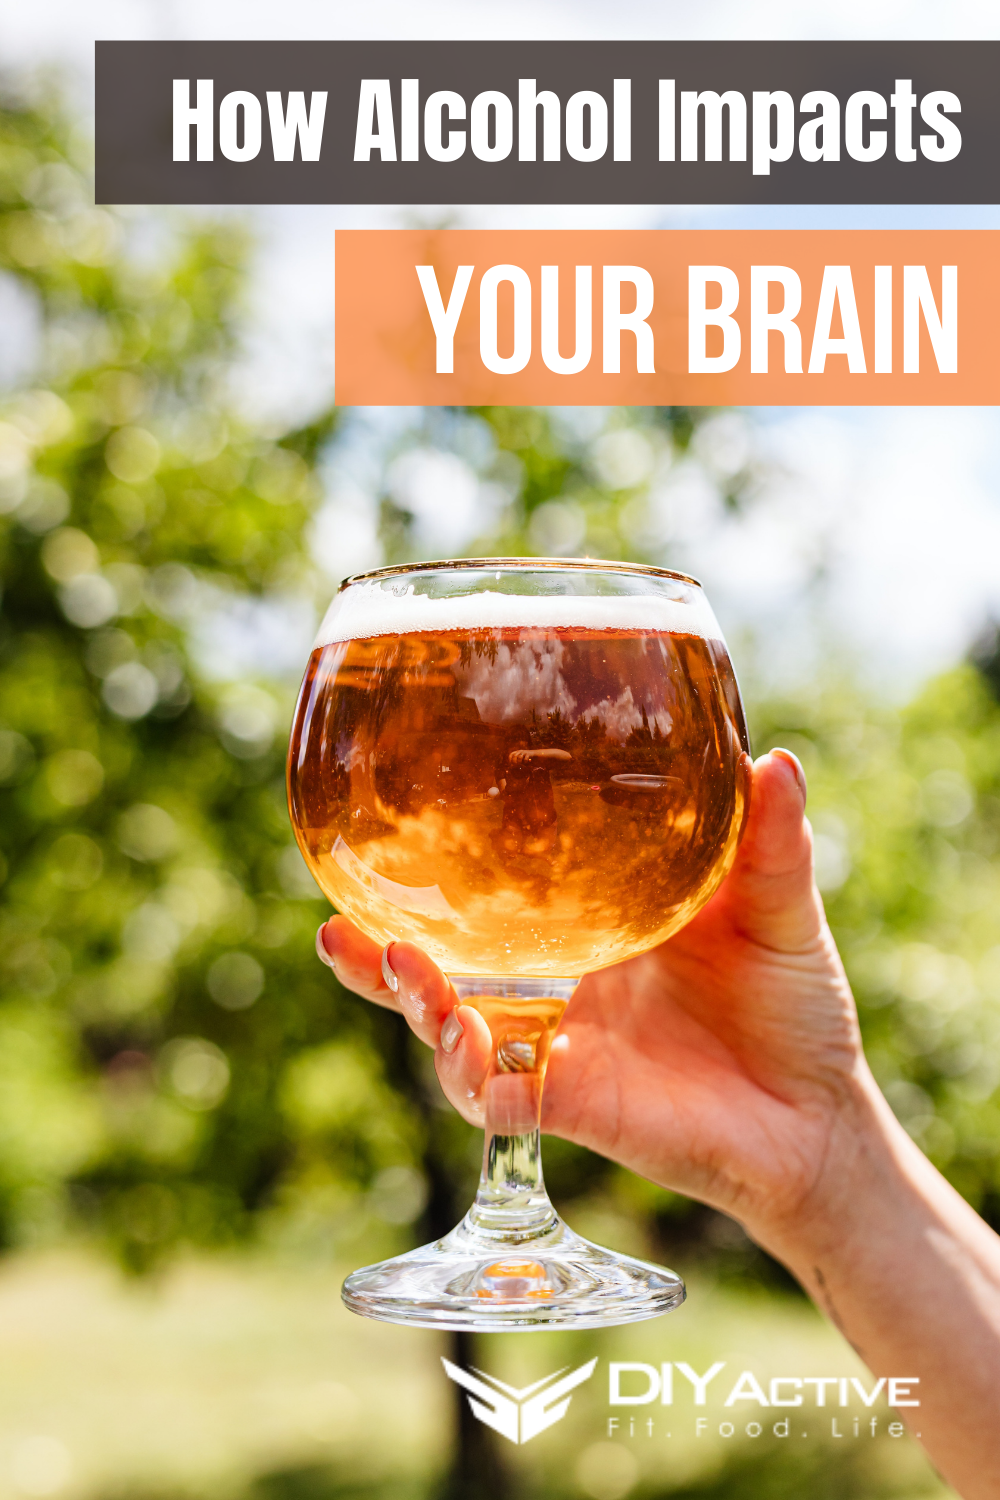 Drinking Too Much? How Alcohol Impacts Your Brain